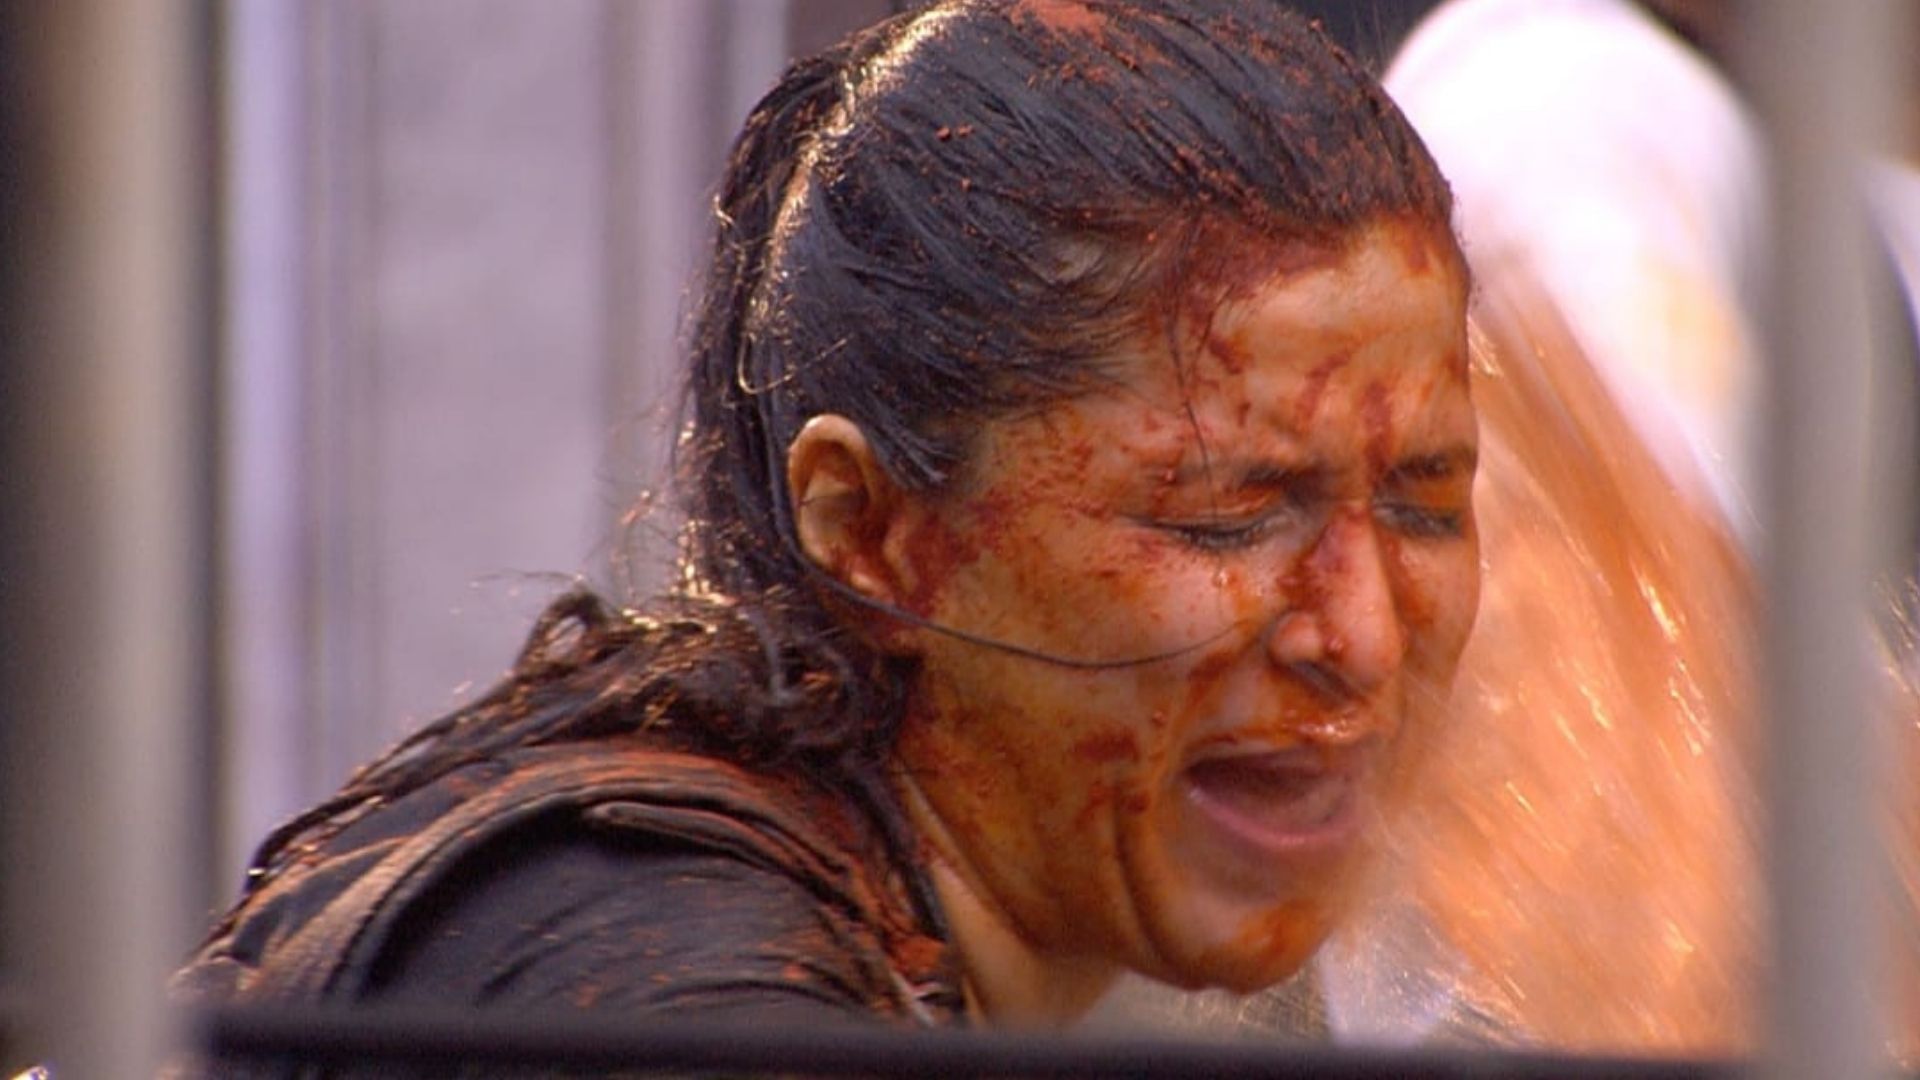 Fiery Showdowns and Vows: Ankita Lokhande and Vicky Jain's Explosive Clash on 'BIGG BOSS